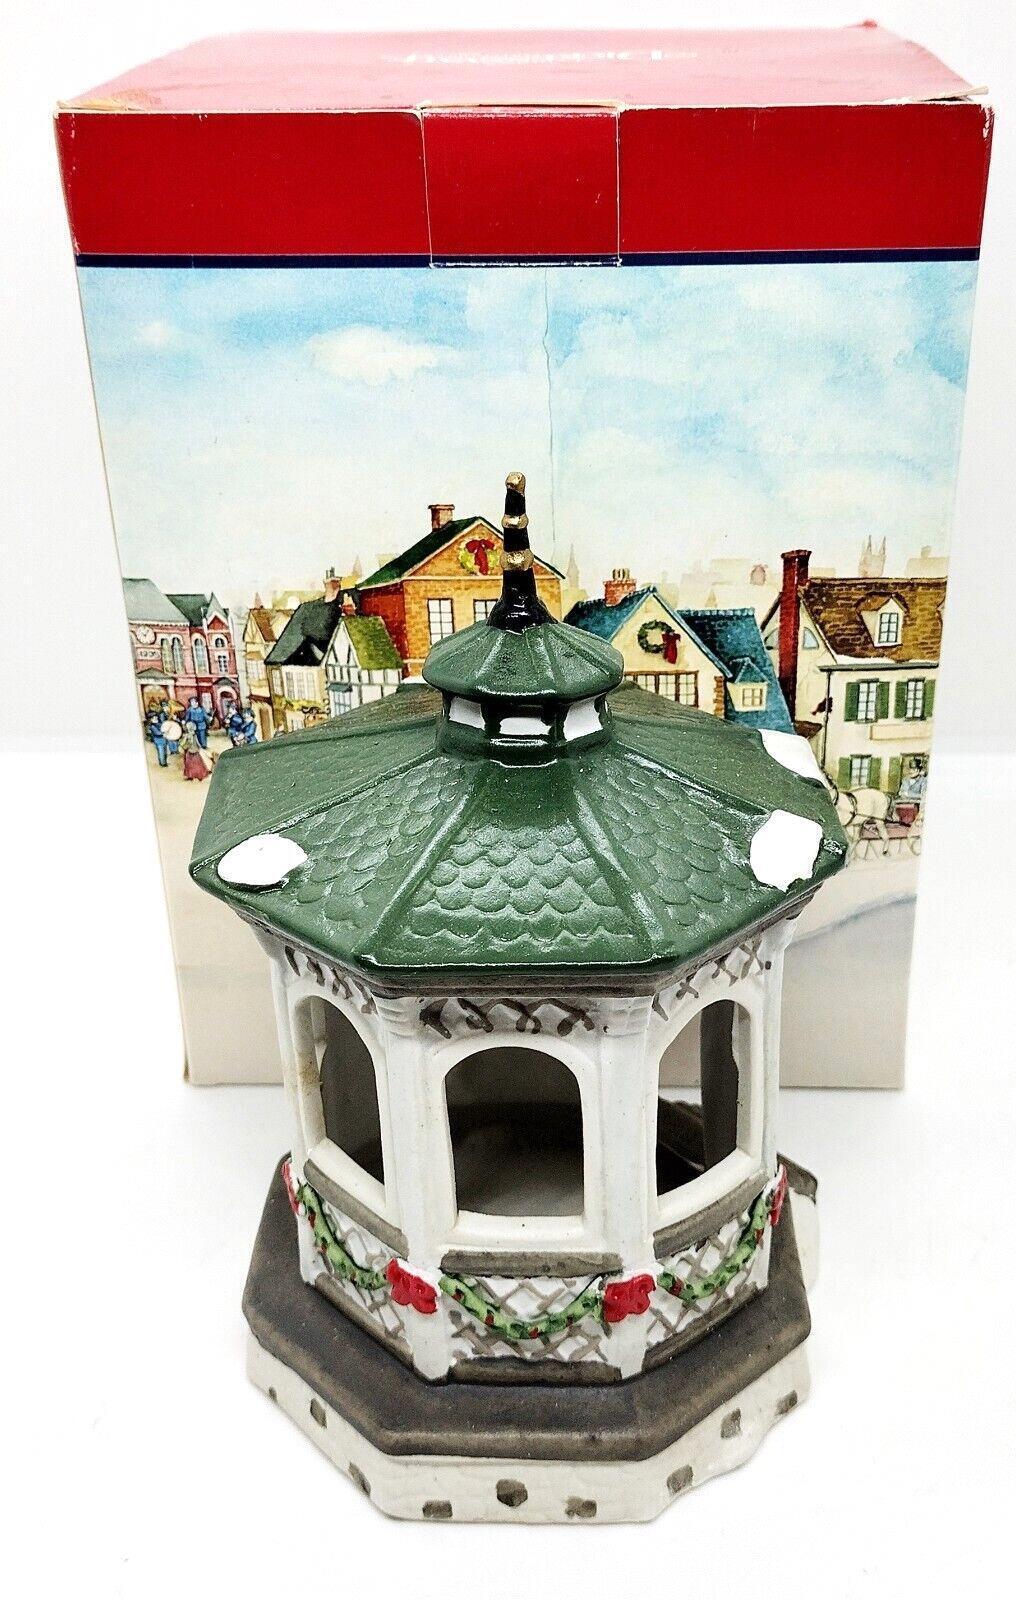 Lemax 1991 Dickensvale Collectables Porcelain Christmas Village Gazebo